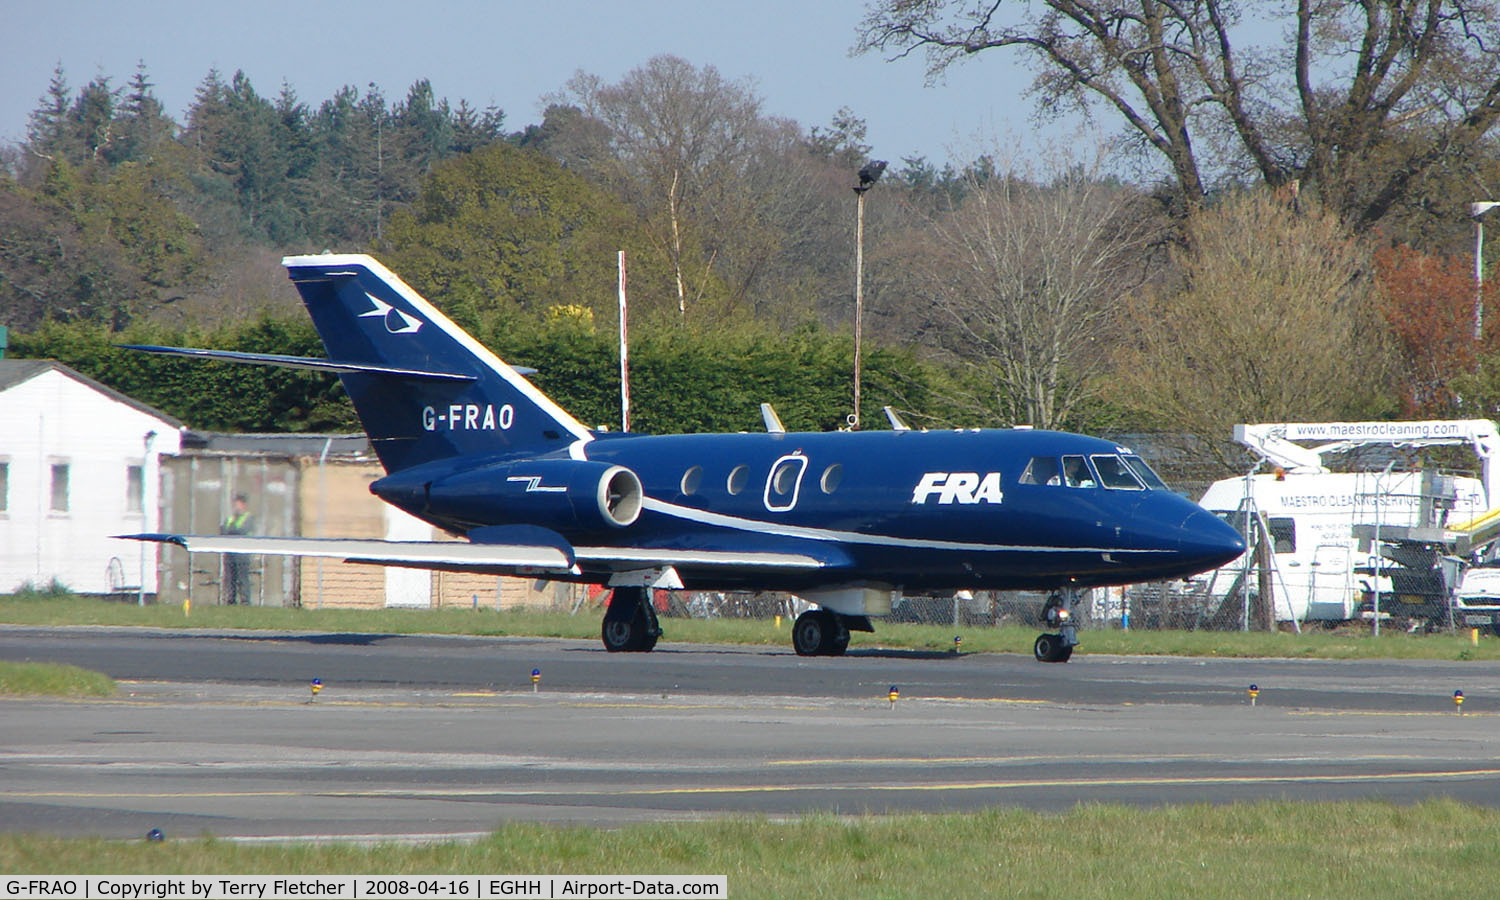 G-FRAO, 1969 Dassault Falcon (Mystere) 20DC C/N 214, FR Aviation Falcon 20 at Bournemouth